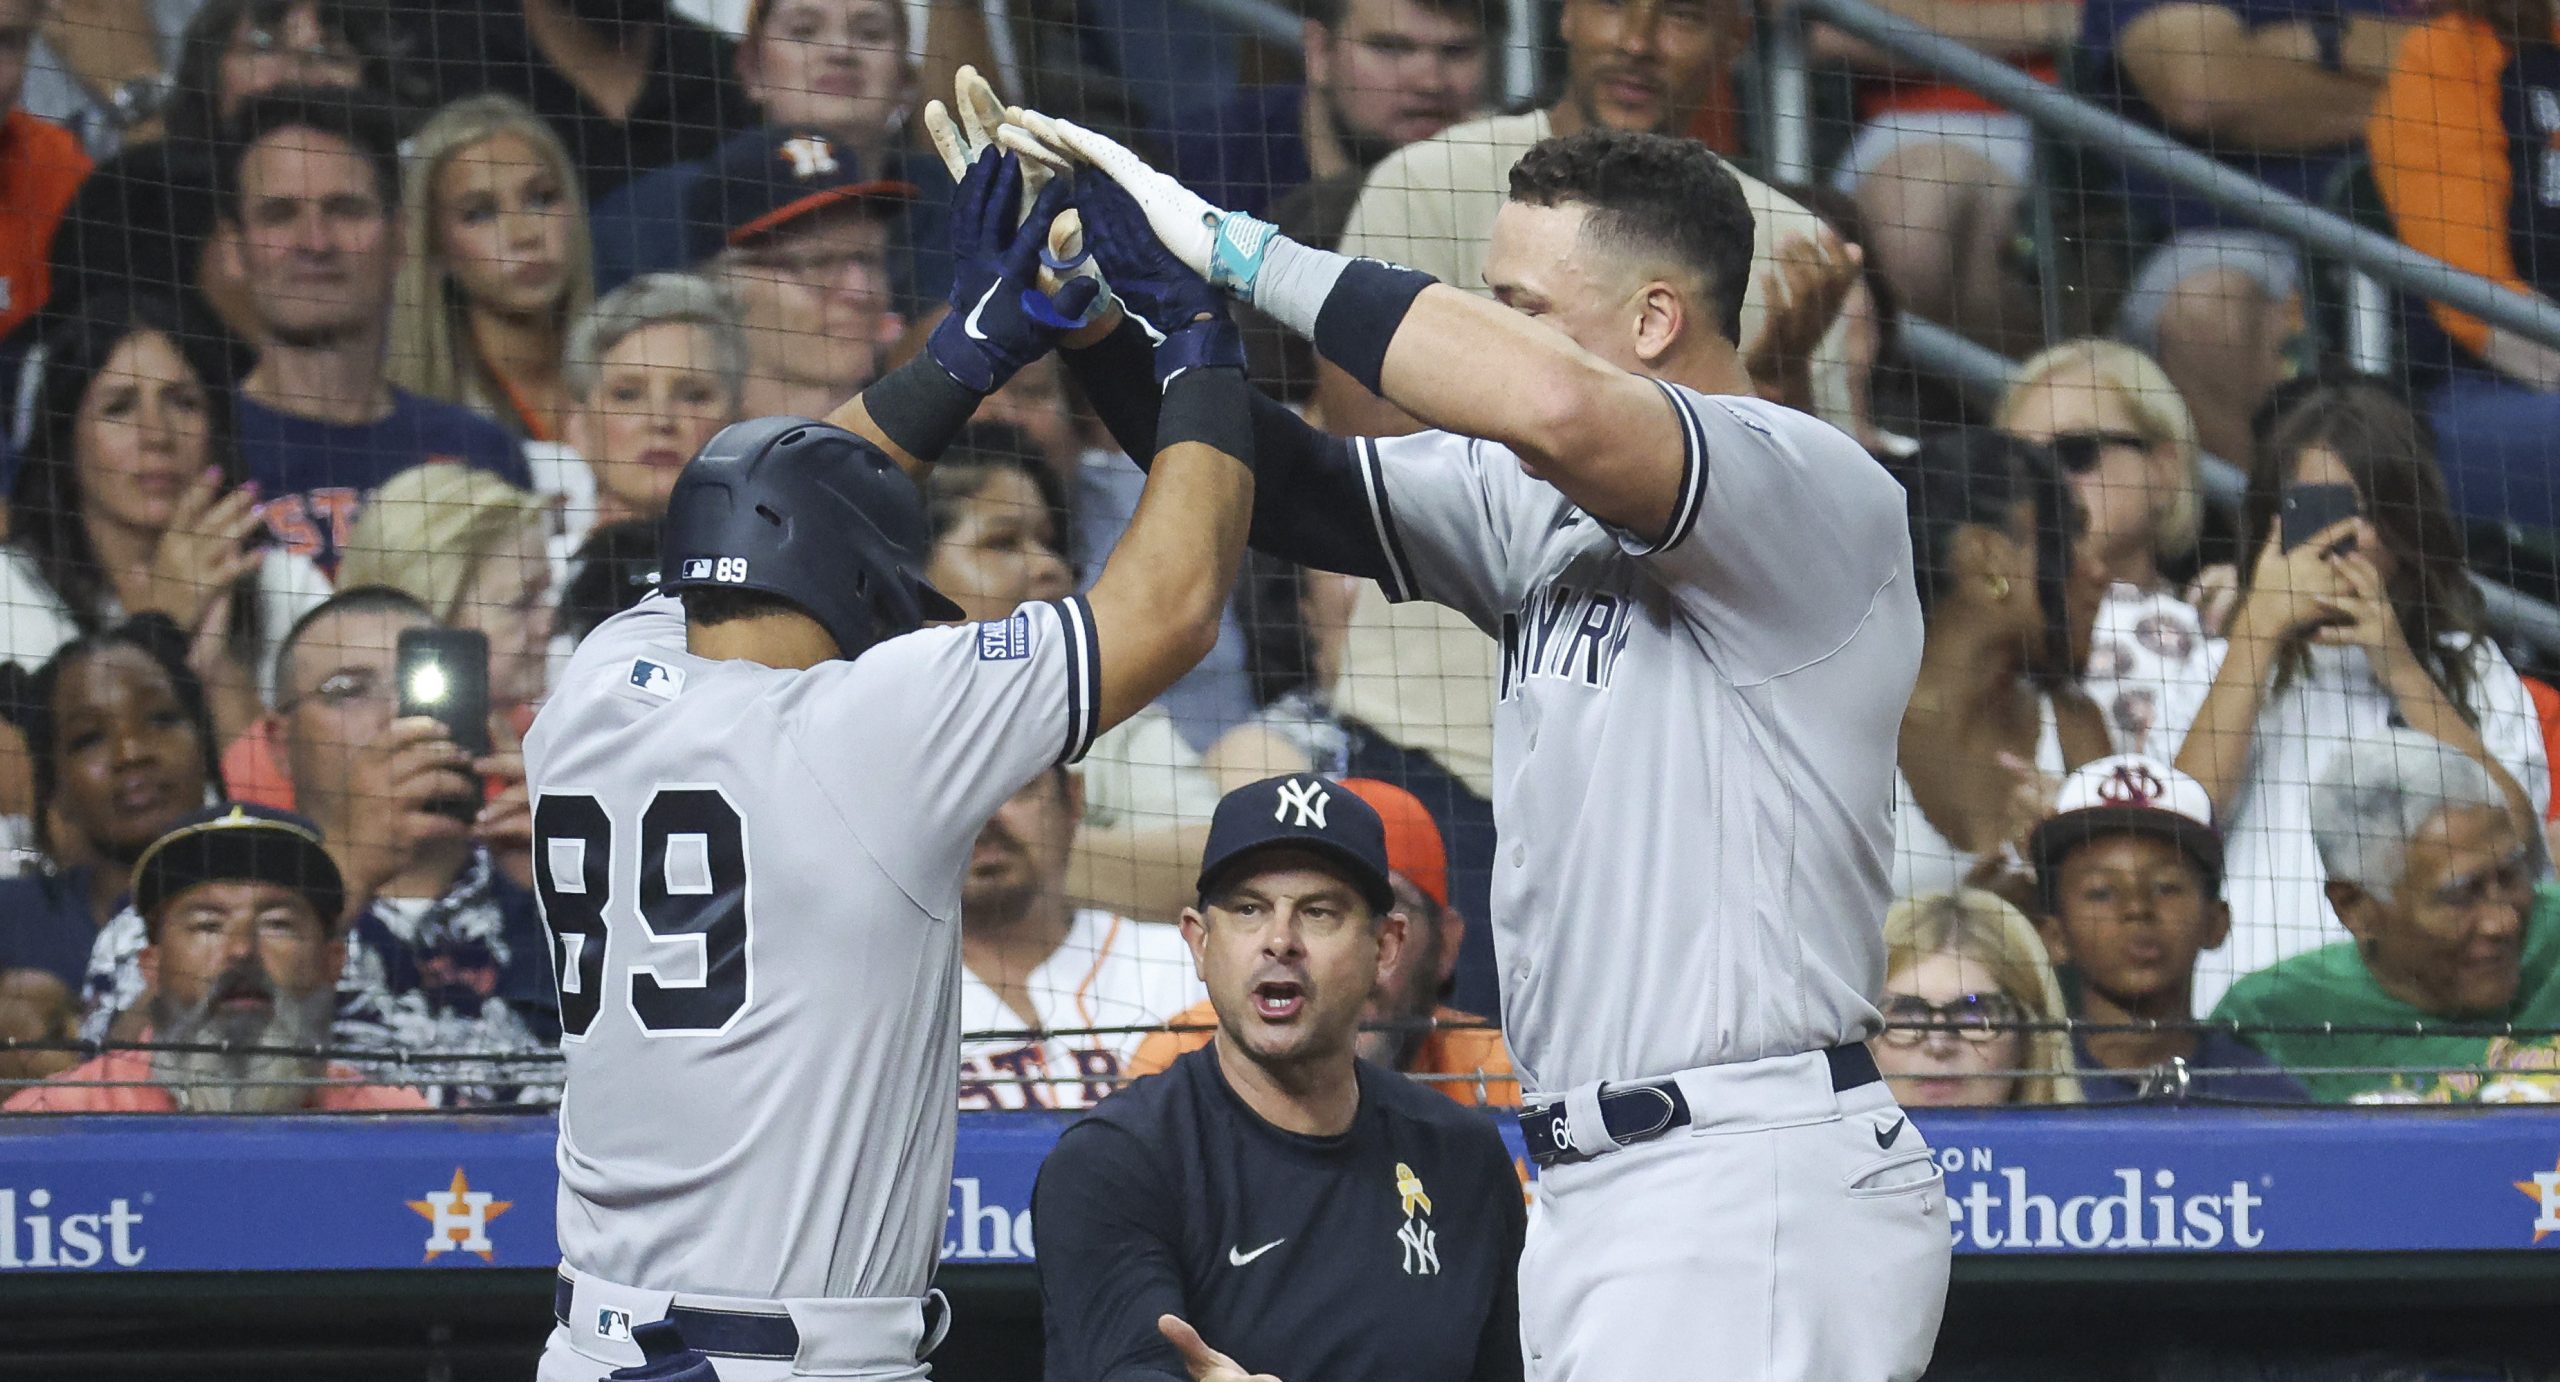 Yankees star Aaron Judge has an optimistic outlook on the team's future, thanks to the team's recent call-ups. Photo Credit: Troy Taormina-USA TODAY Sports